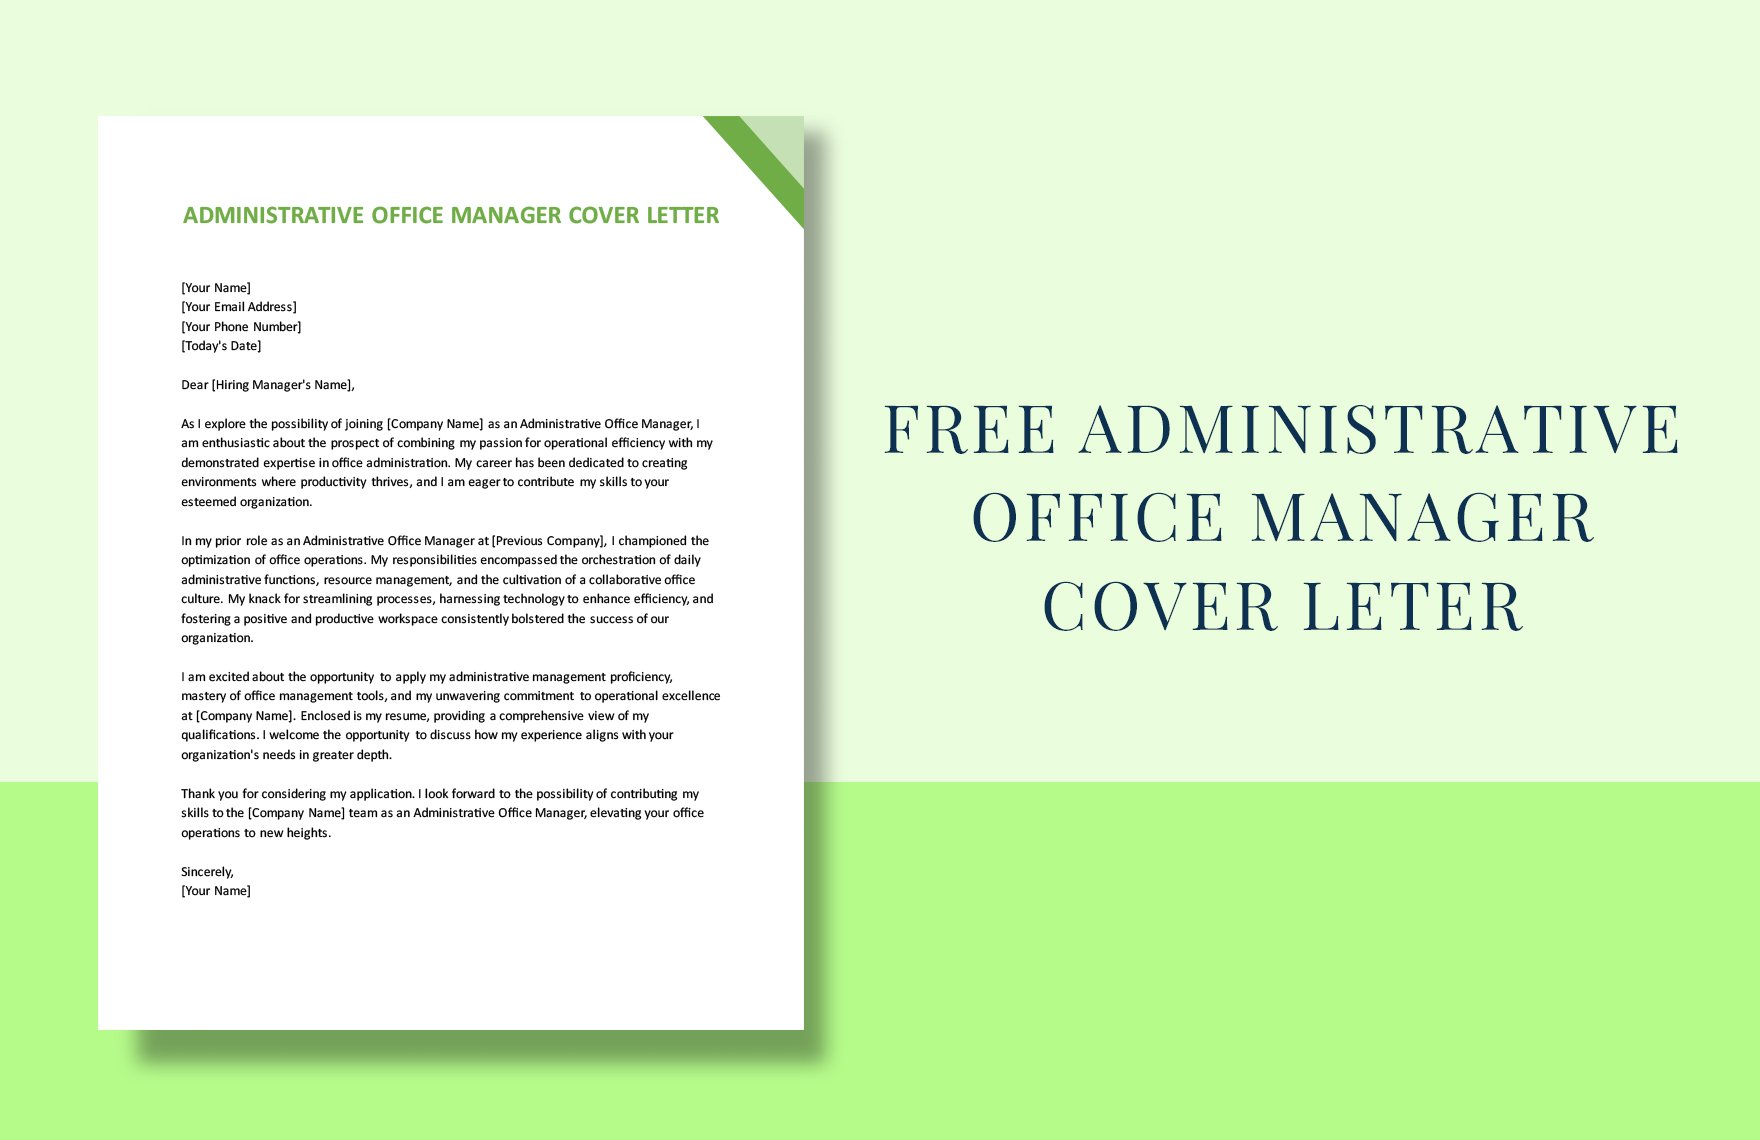 Administrative Office Manager Cover Letter